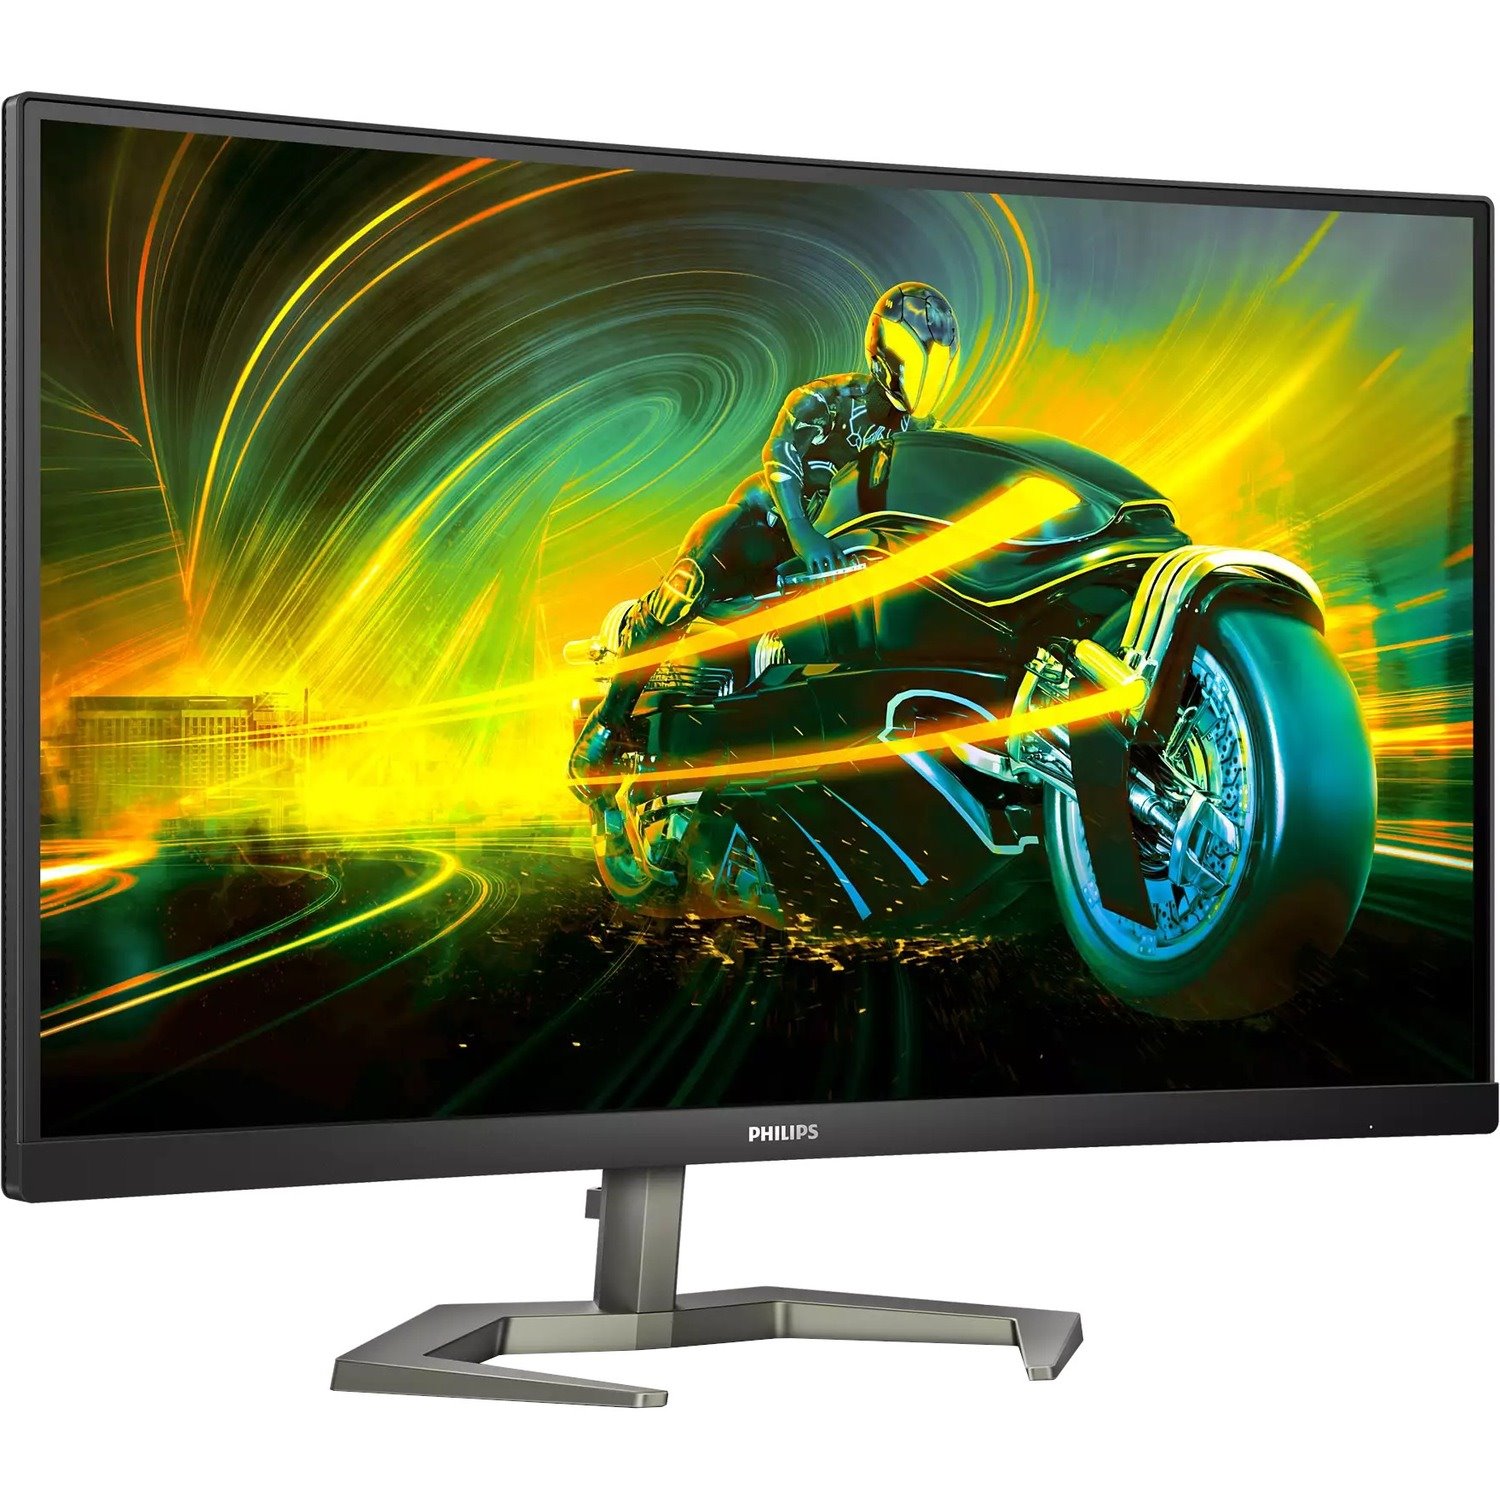 Philips Momentum 27M1C5500VL 68.6 cm (27") WQHD Curved Screen WLED Gaming LCD Monitor - 16:9 - Textured Black